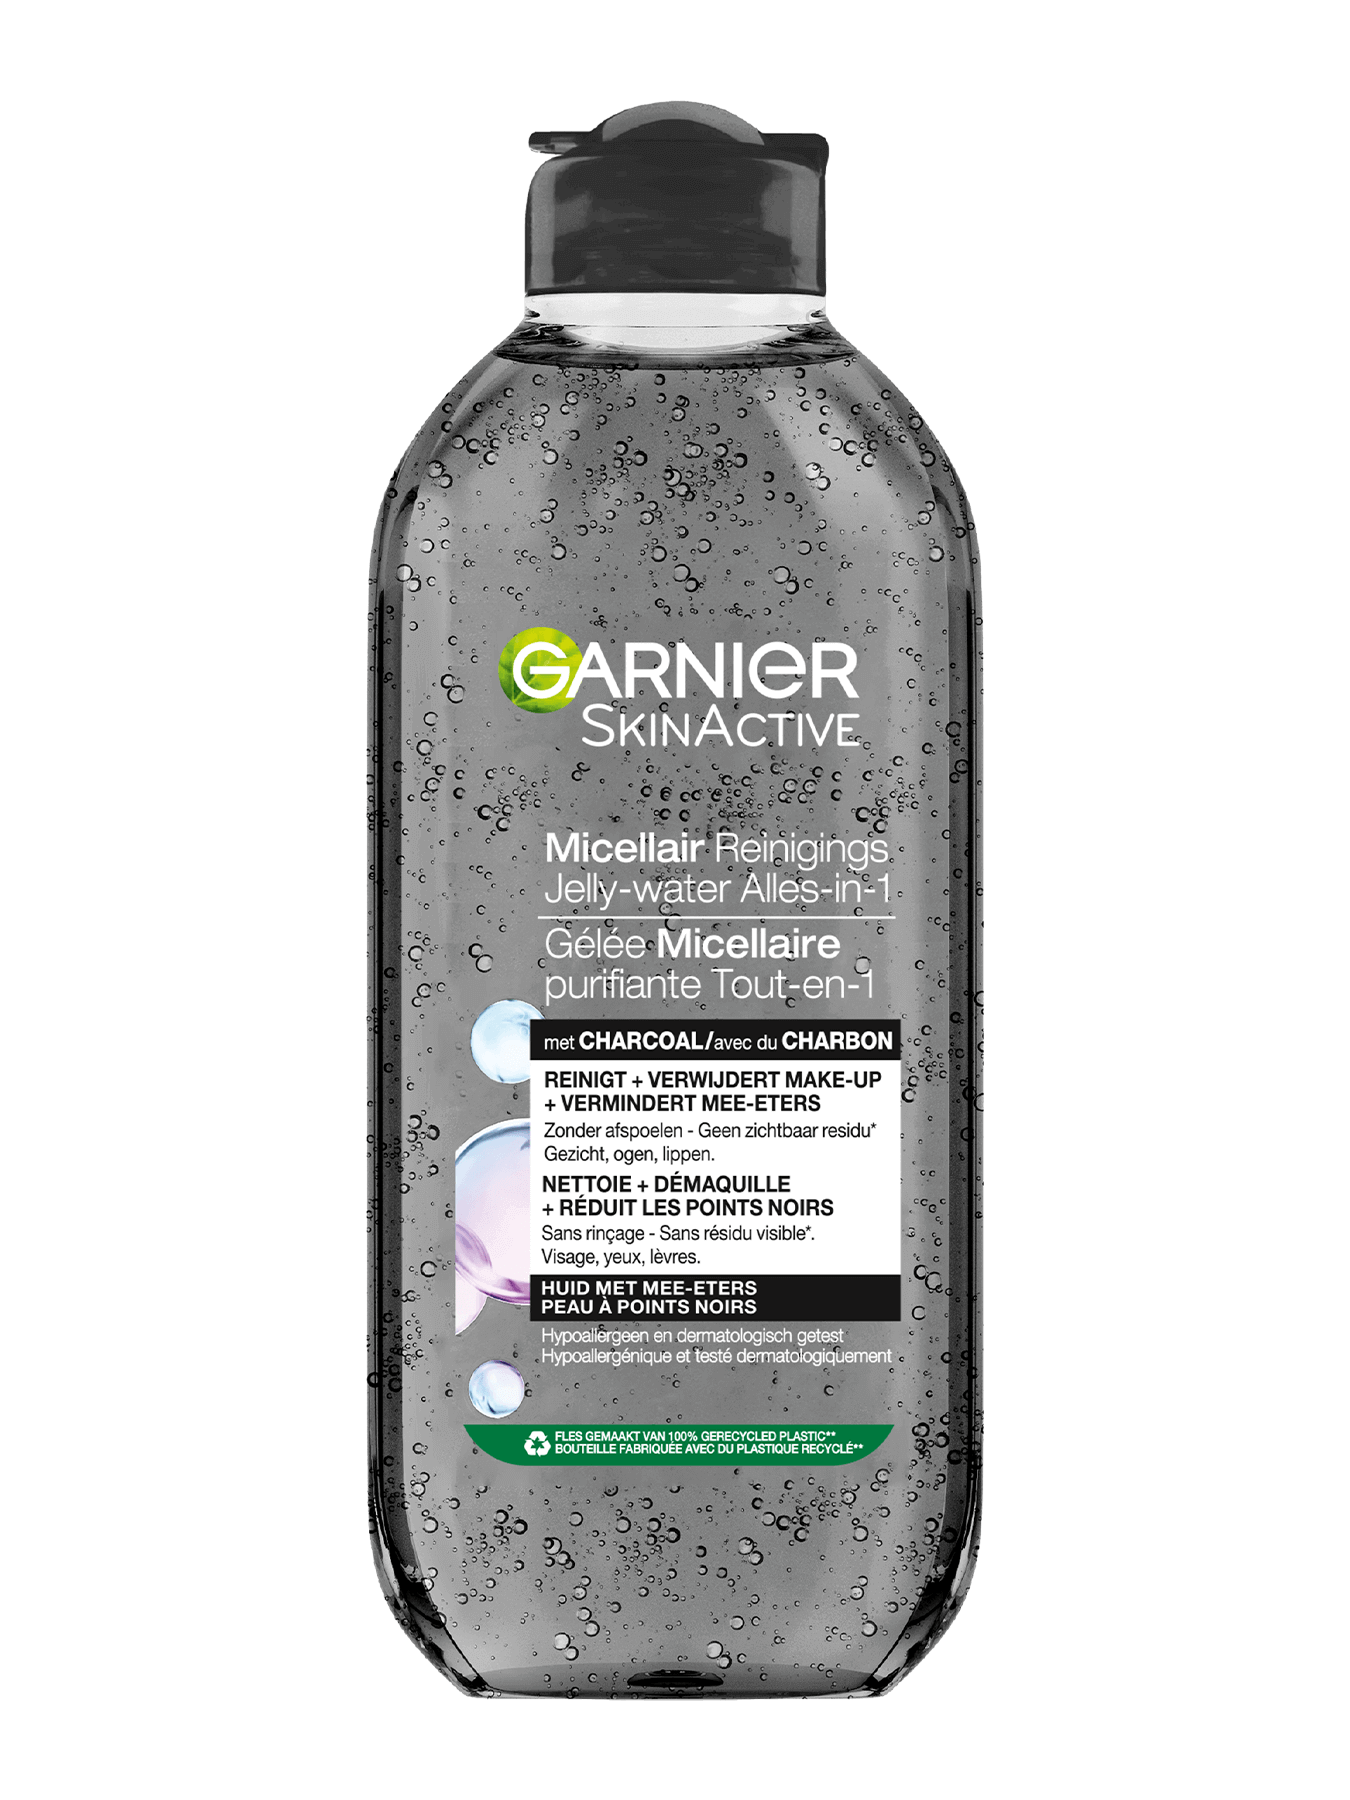 GAR Micellair Reiningingswater Charcoal 400ml 3600542539722 front 1350x1800 2